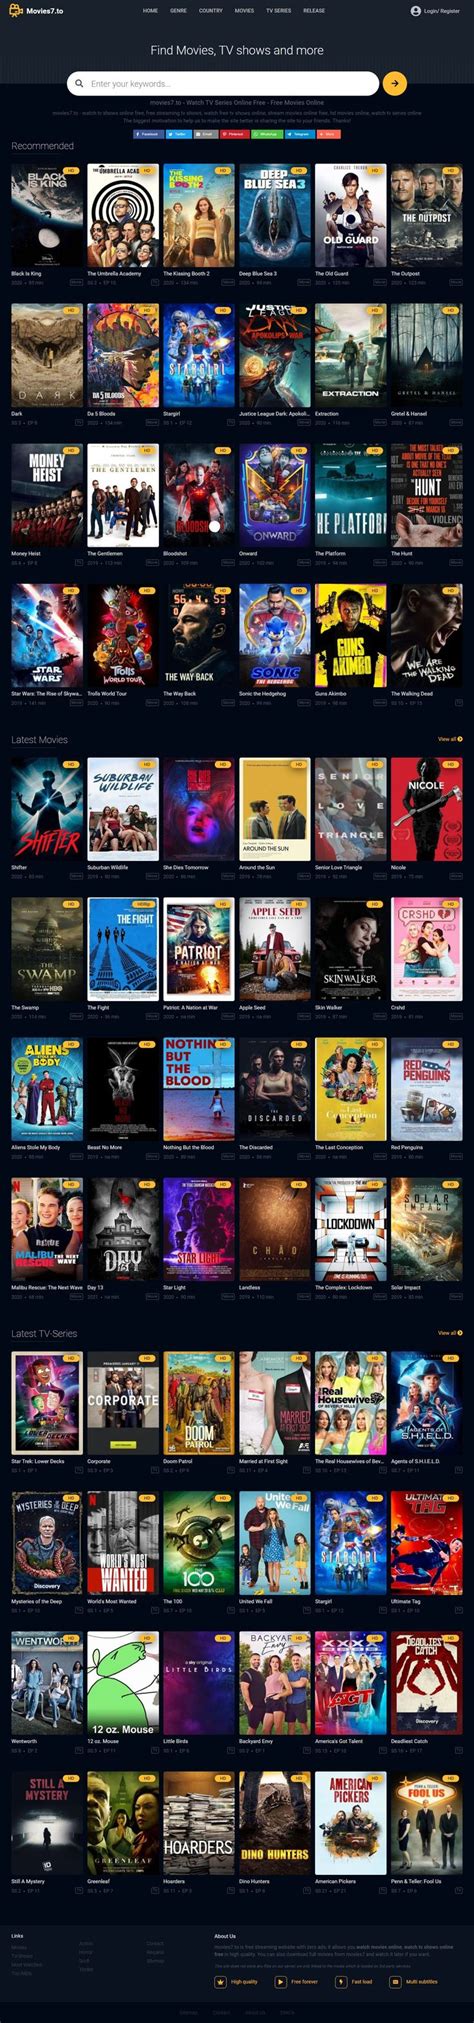 Free Movies Without Sign Up Or Paying In 2021 Tv Series To Watch Tv